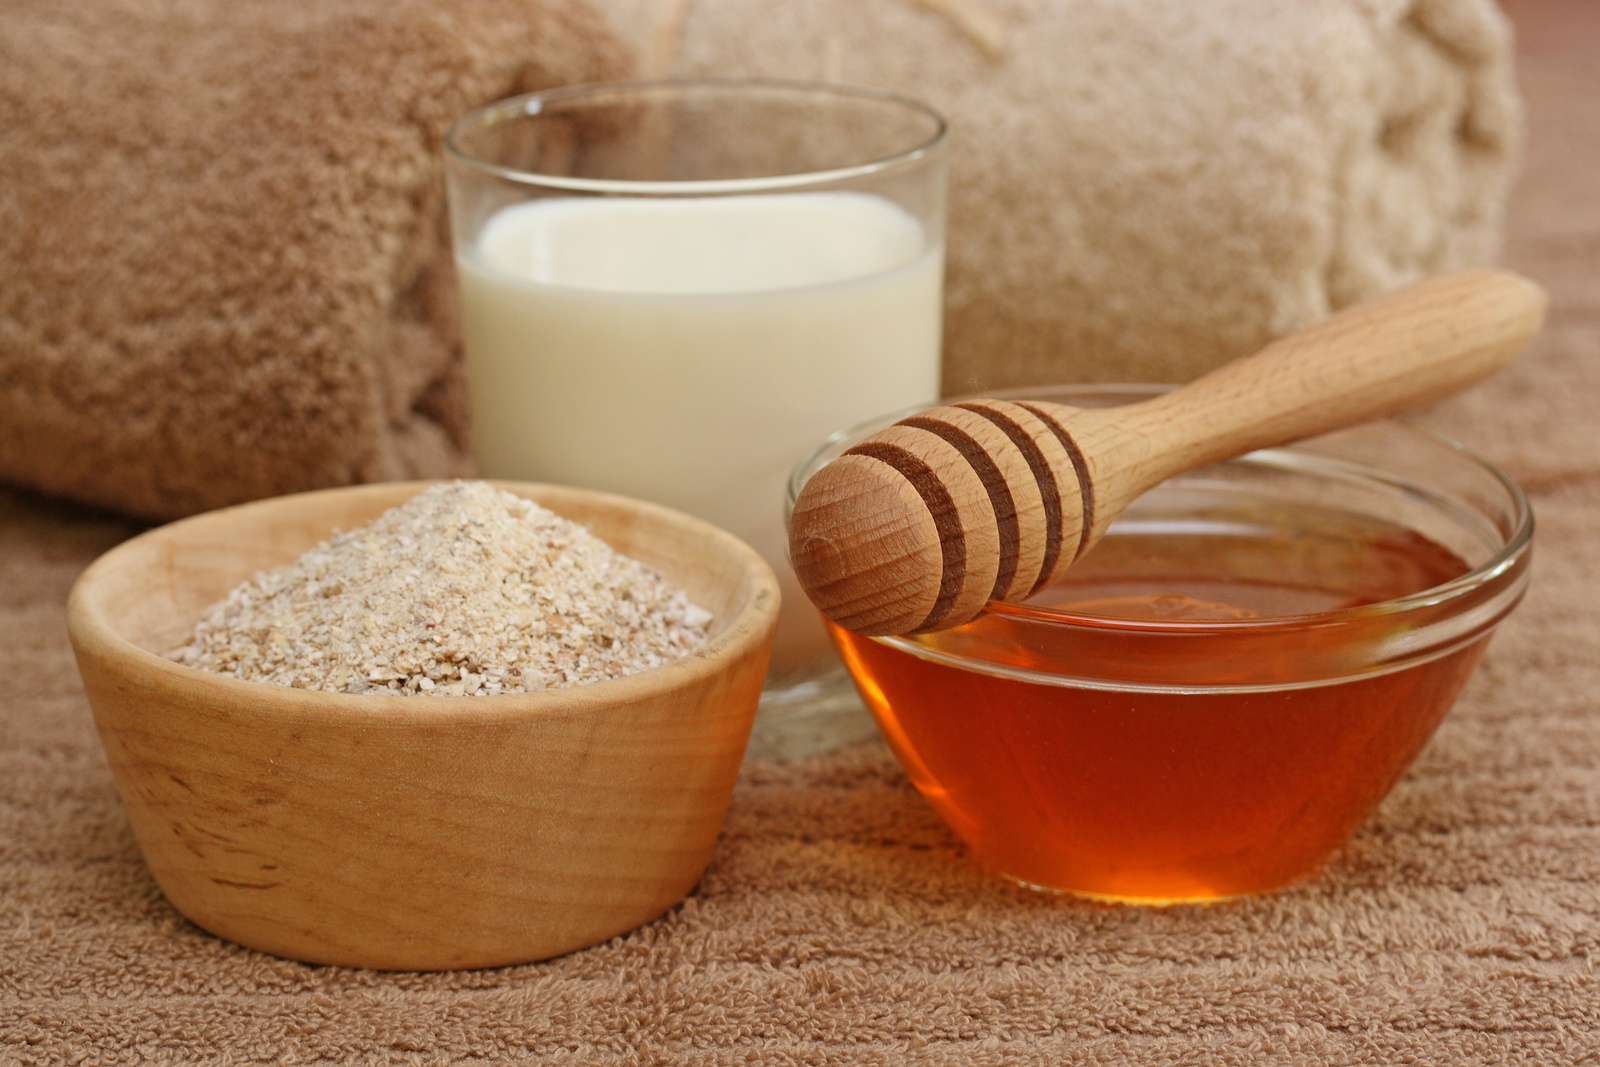 10 Home Remedies For Dry Skin That Will Leave Your Skin Feeling Silky And Smooth